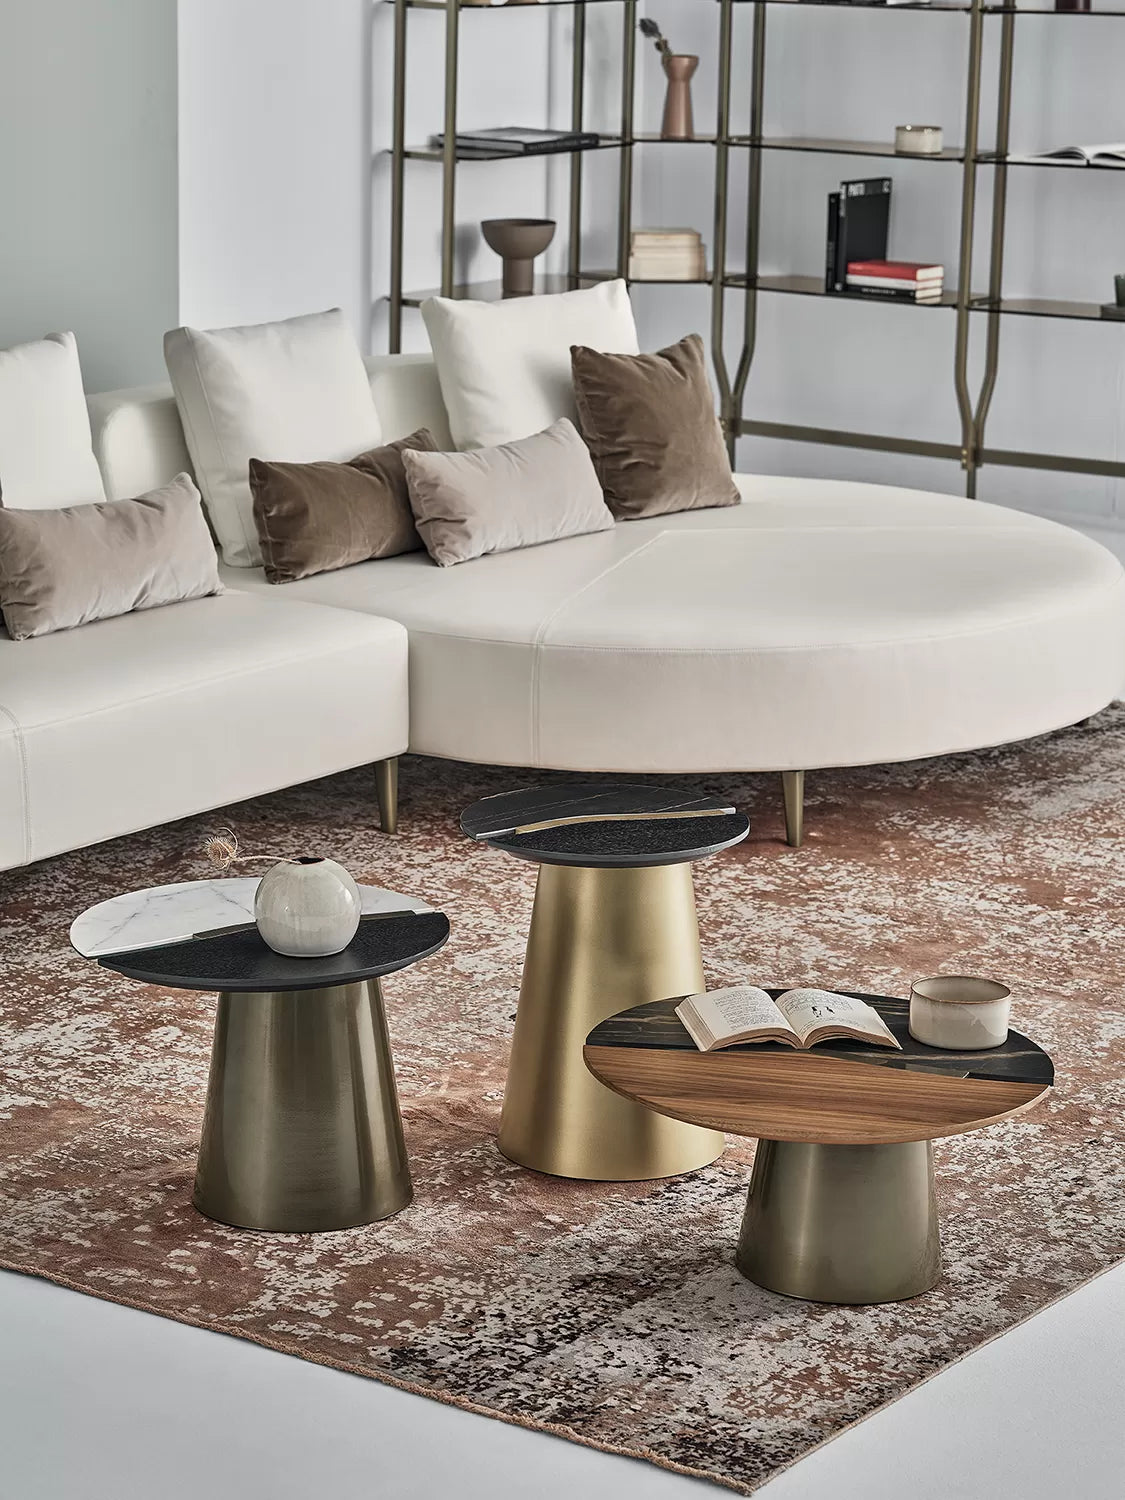 Yang Coffee Table With Metal Frame And Decorative Details 08 22